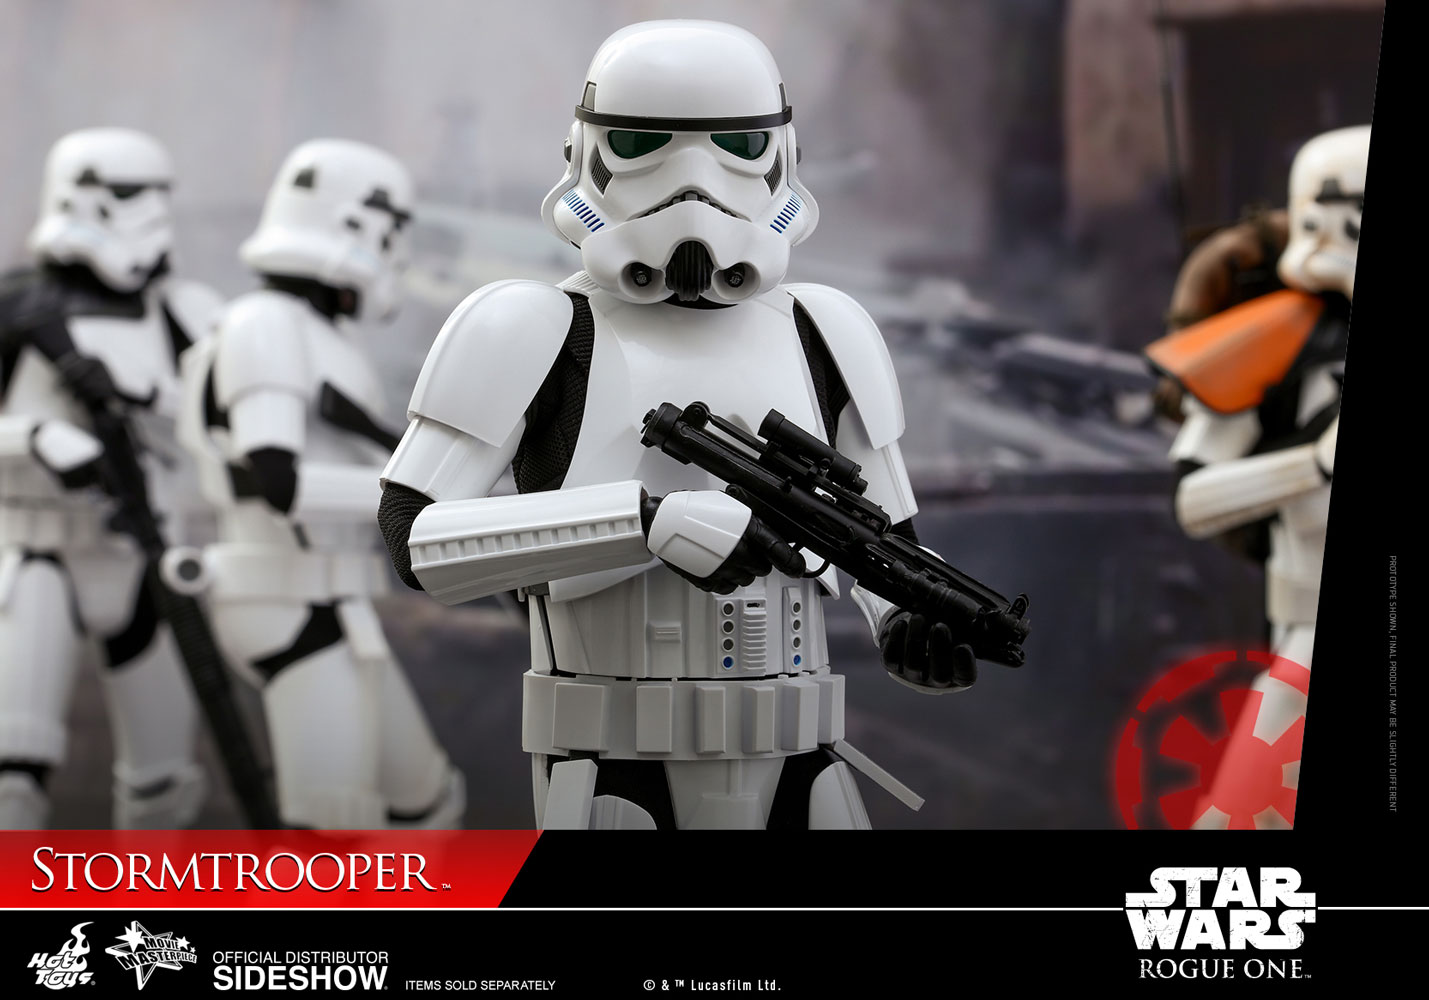 star-wars-rogue-one-stormtrooper-sixth-scale-hot-toys-902874-07.jpg